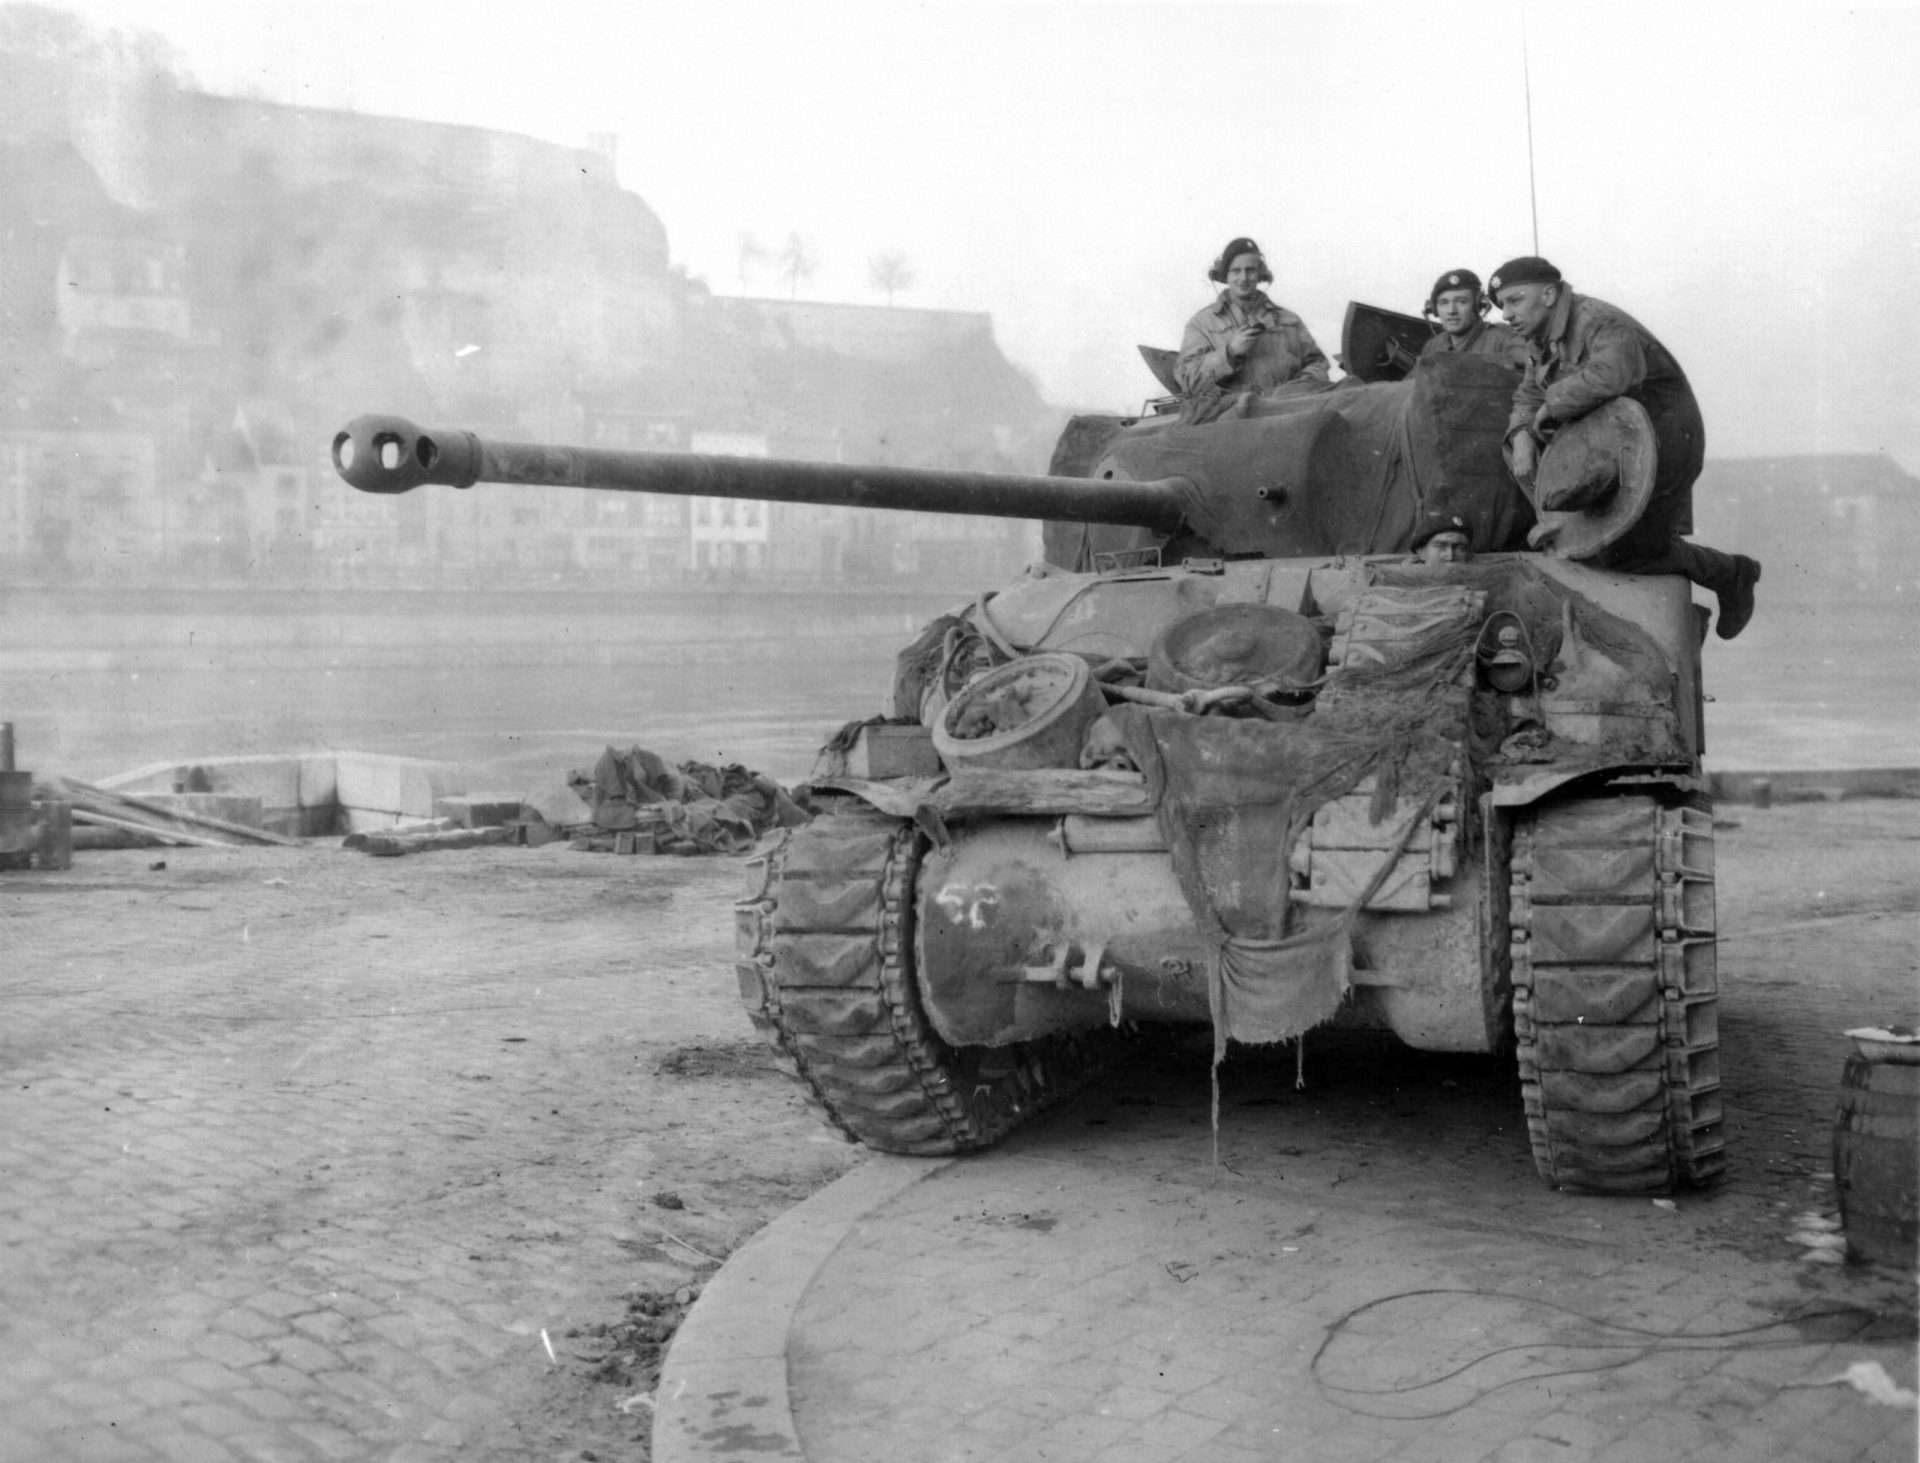 American M36 Tank Destroyers at the Battle of the Bulge